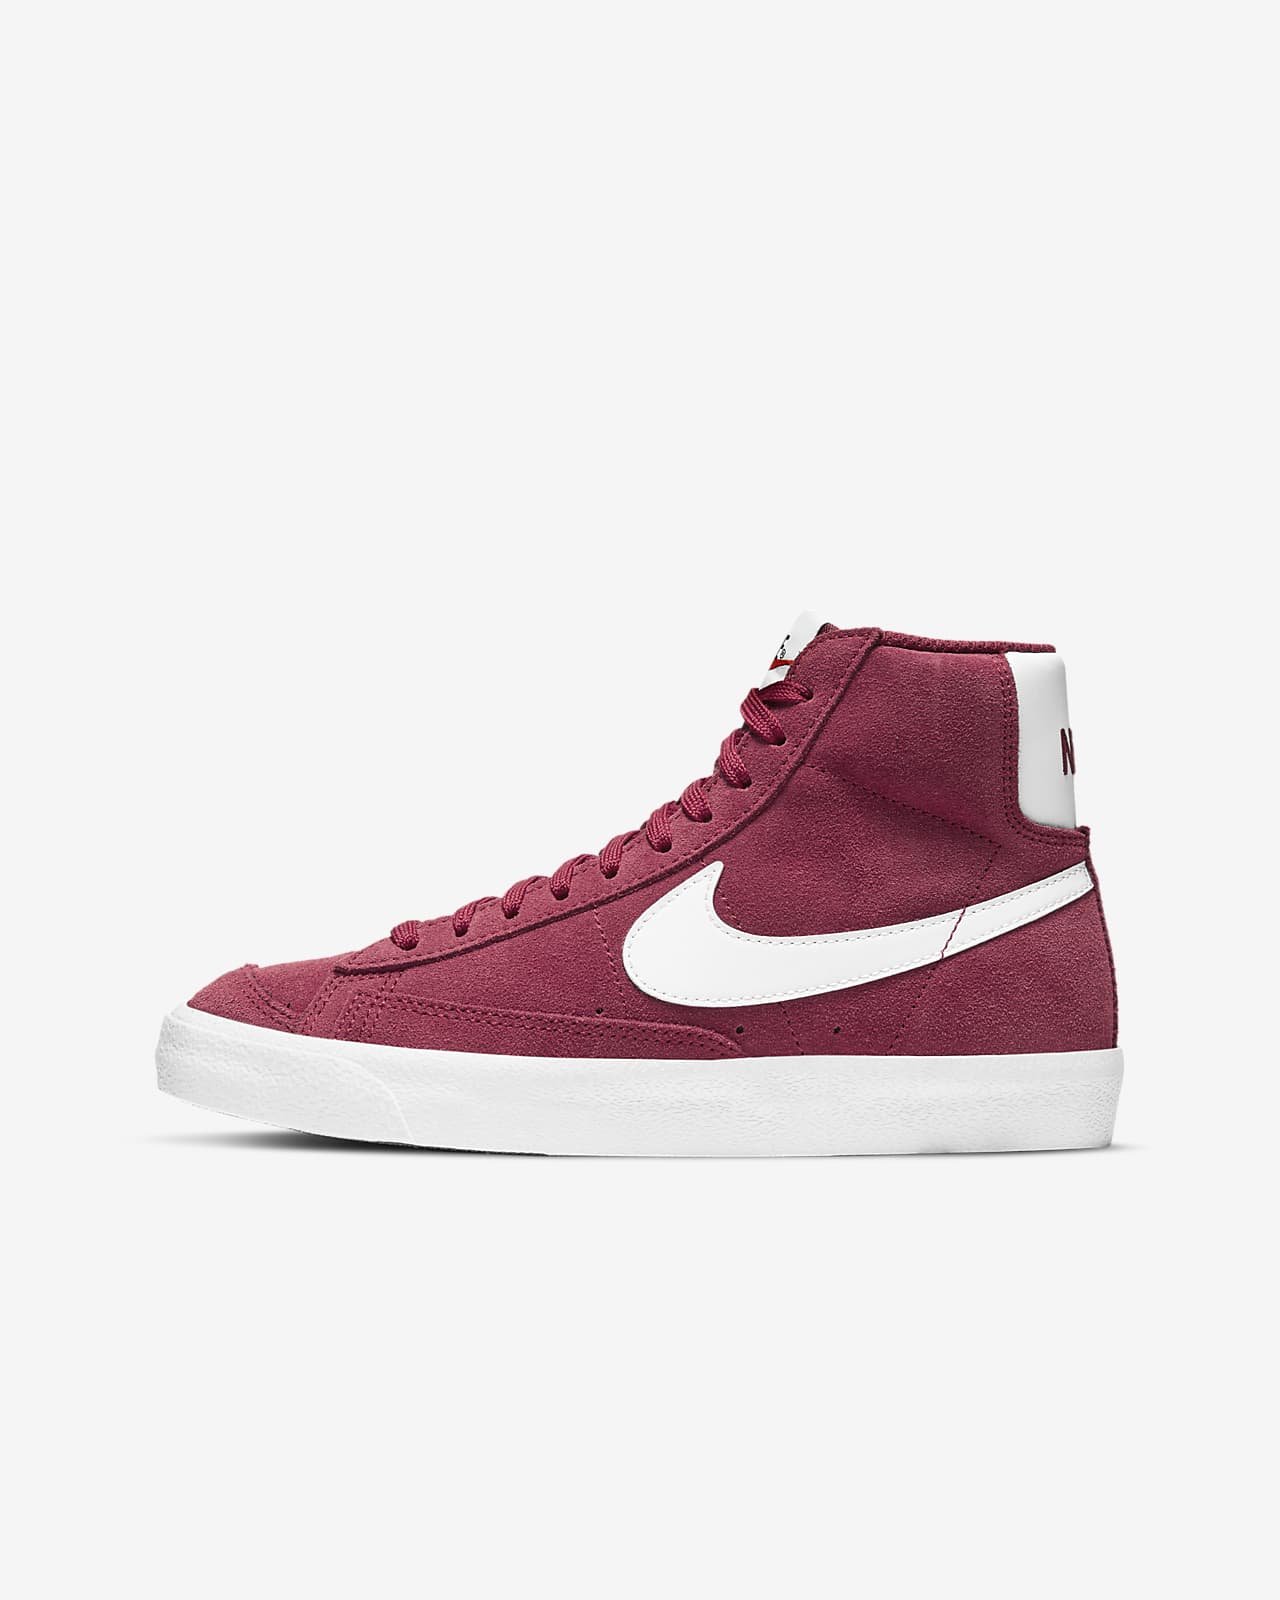 GS Nike Blazer Mid '77 Suede 'Team Red' $33.58 Free Shipping - Sneaker ...